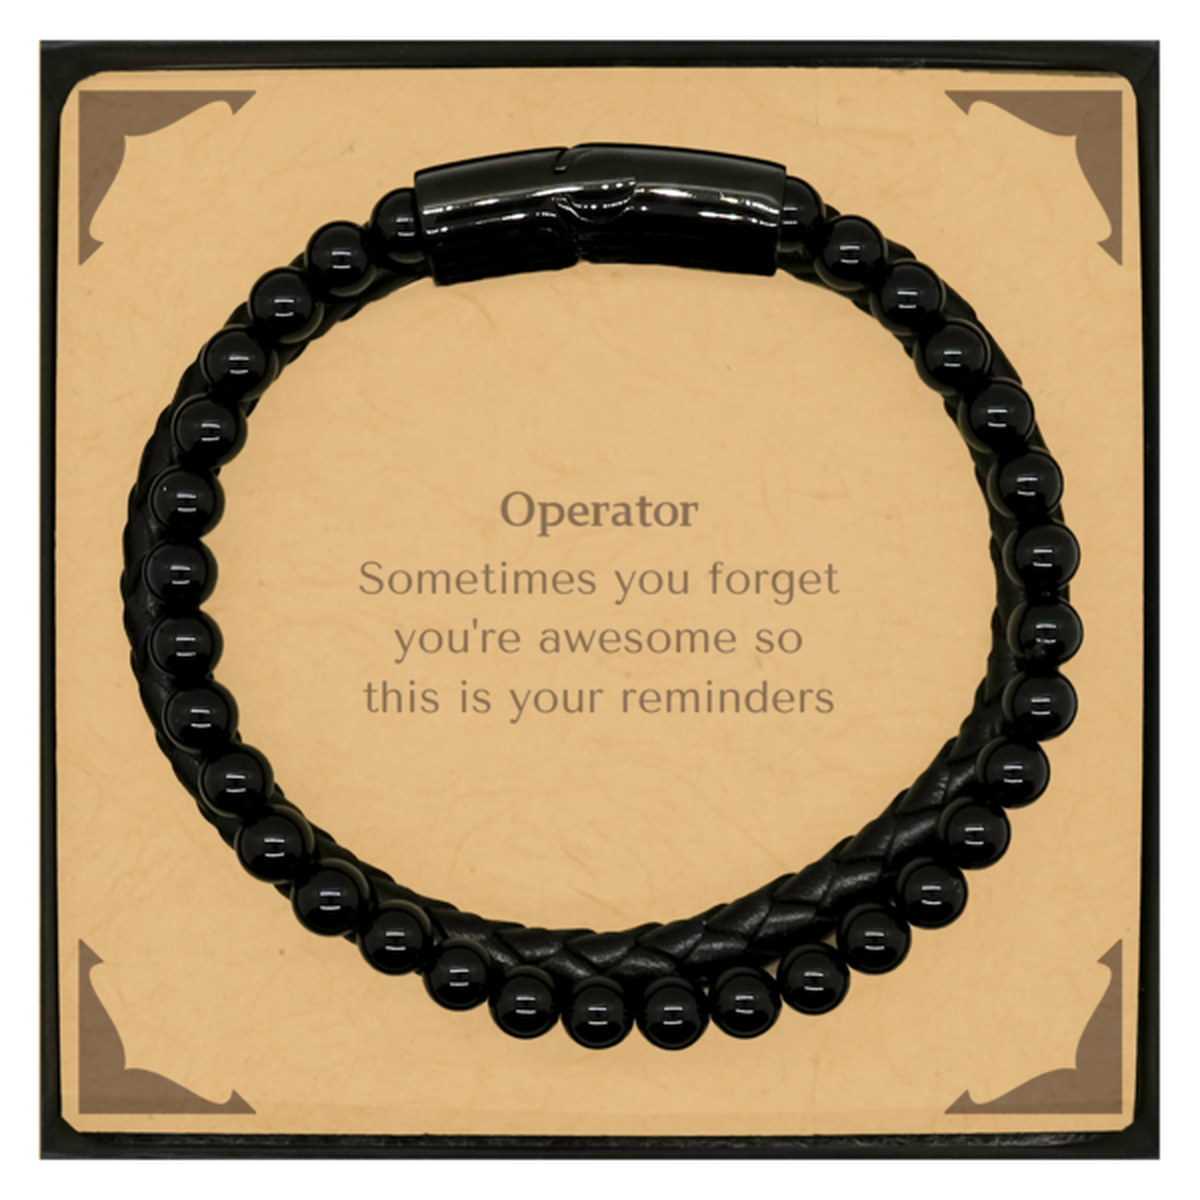 Sentimental Operator Stone Leather Bracelets, Operator Sometimes you forget you're awesome so this is your reminders, Graduation Christmas Birthday Gifts for Operator, Men, Women, Coworkers